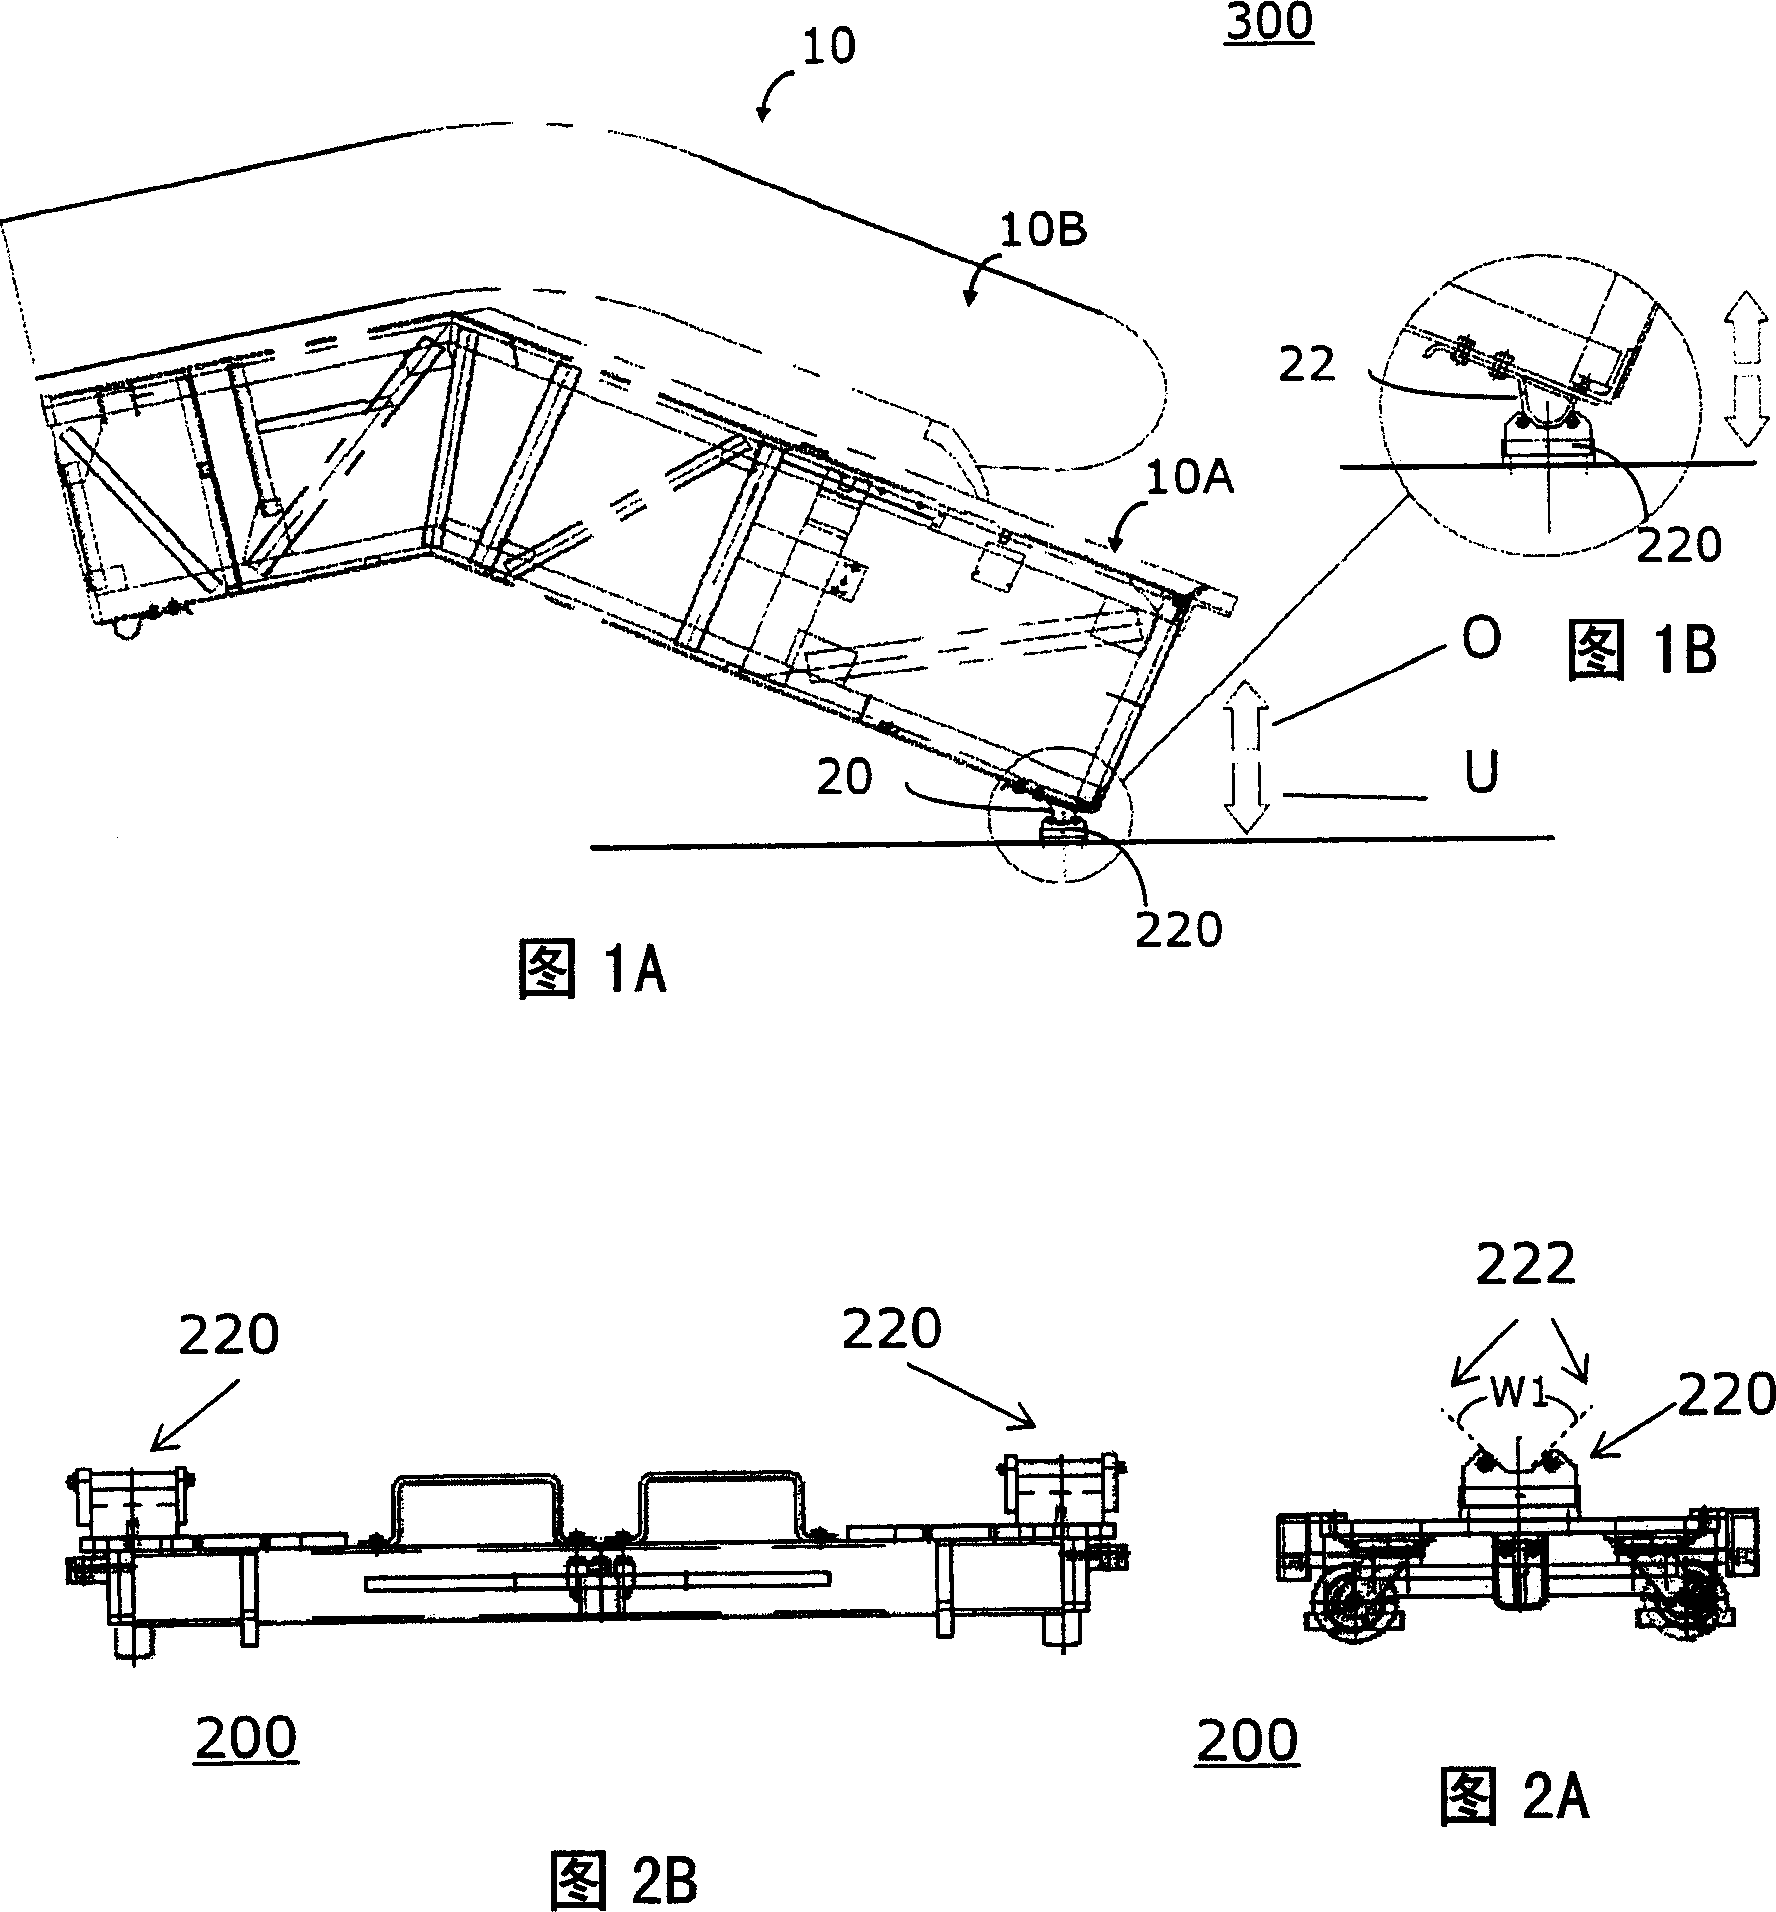 Transportation system cradle, intermediate product, assembly plant, and method for manufacturing assembly